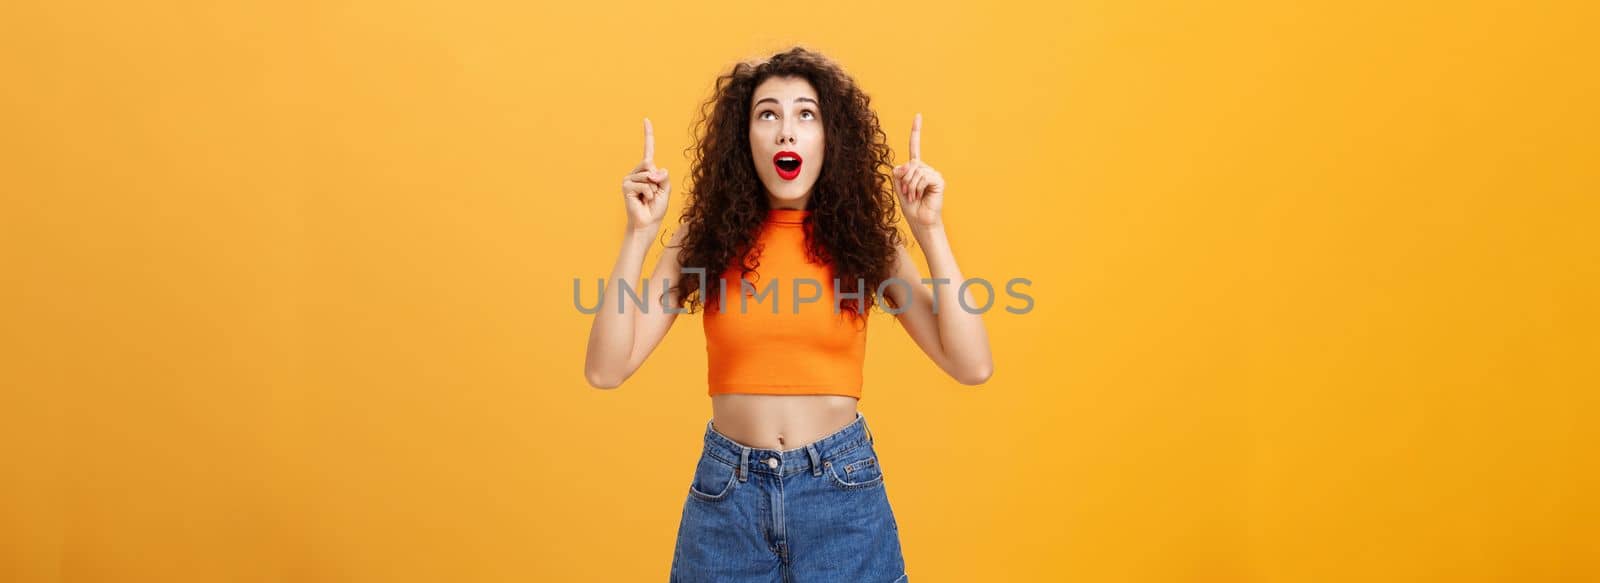 Portrait of amazed emotive and charismatic young curly-haired woman with red lipstic looking and pointing up mesmerized and astonished standing under impression over orange background. Copy space